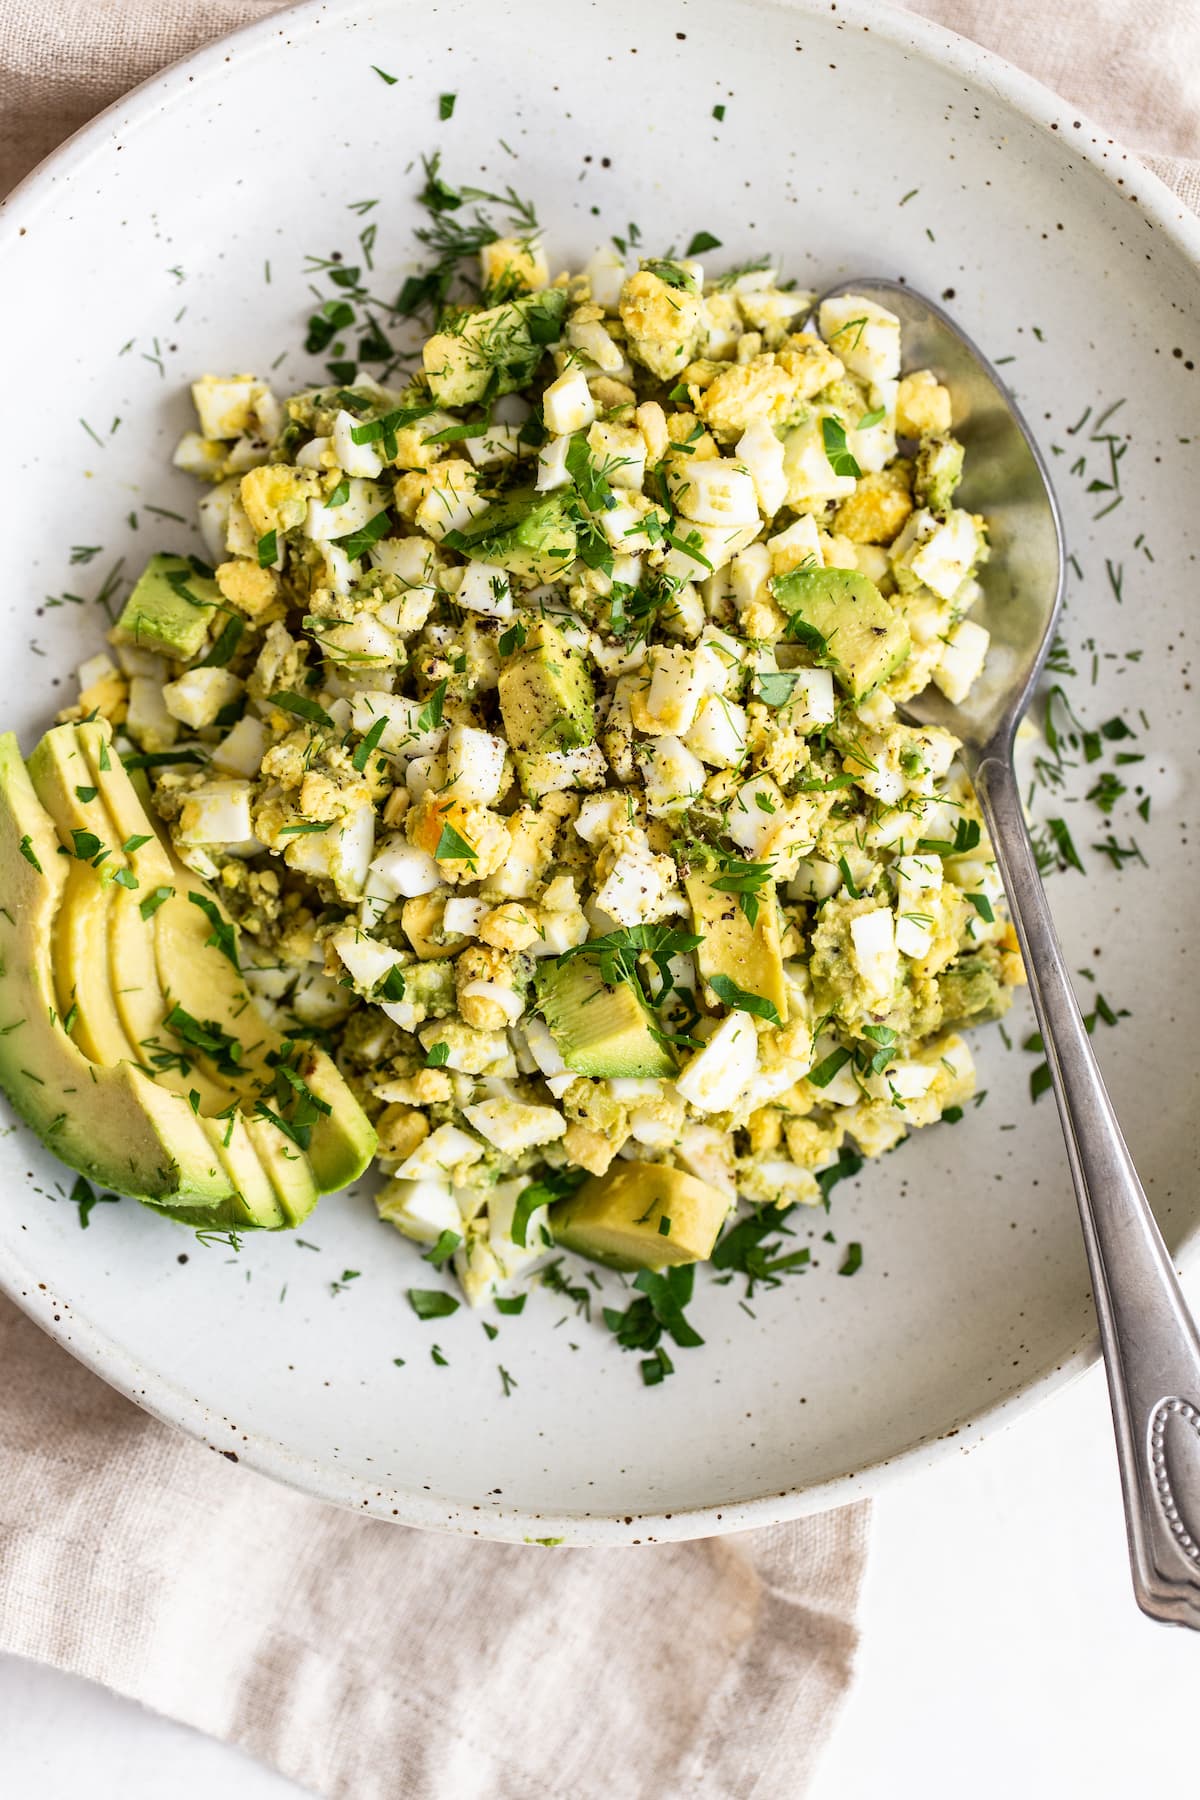 Bowl with avocado egg salad and spoon. Salad is garnished with avocado slices and herbs.